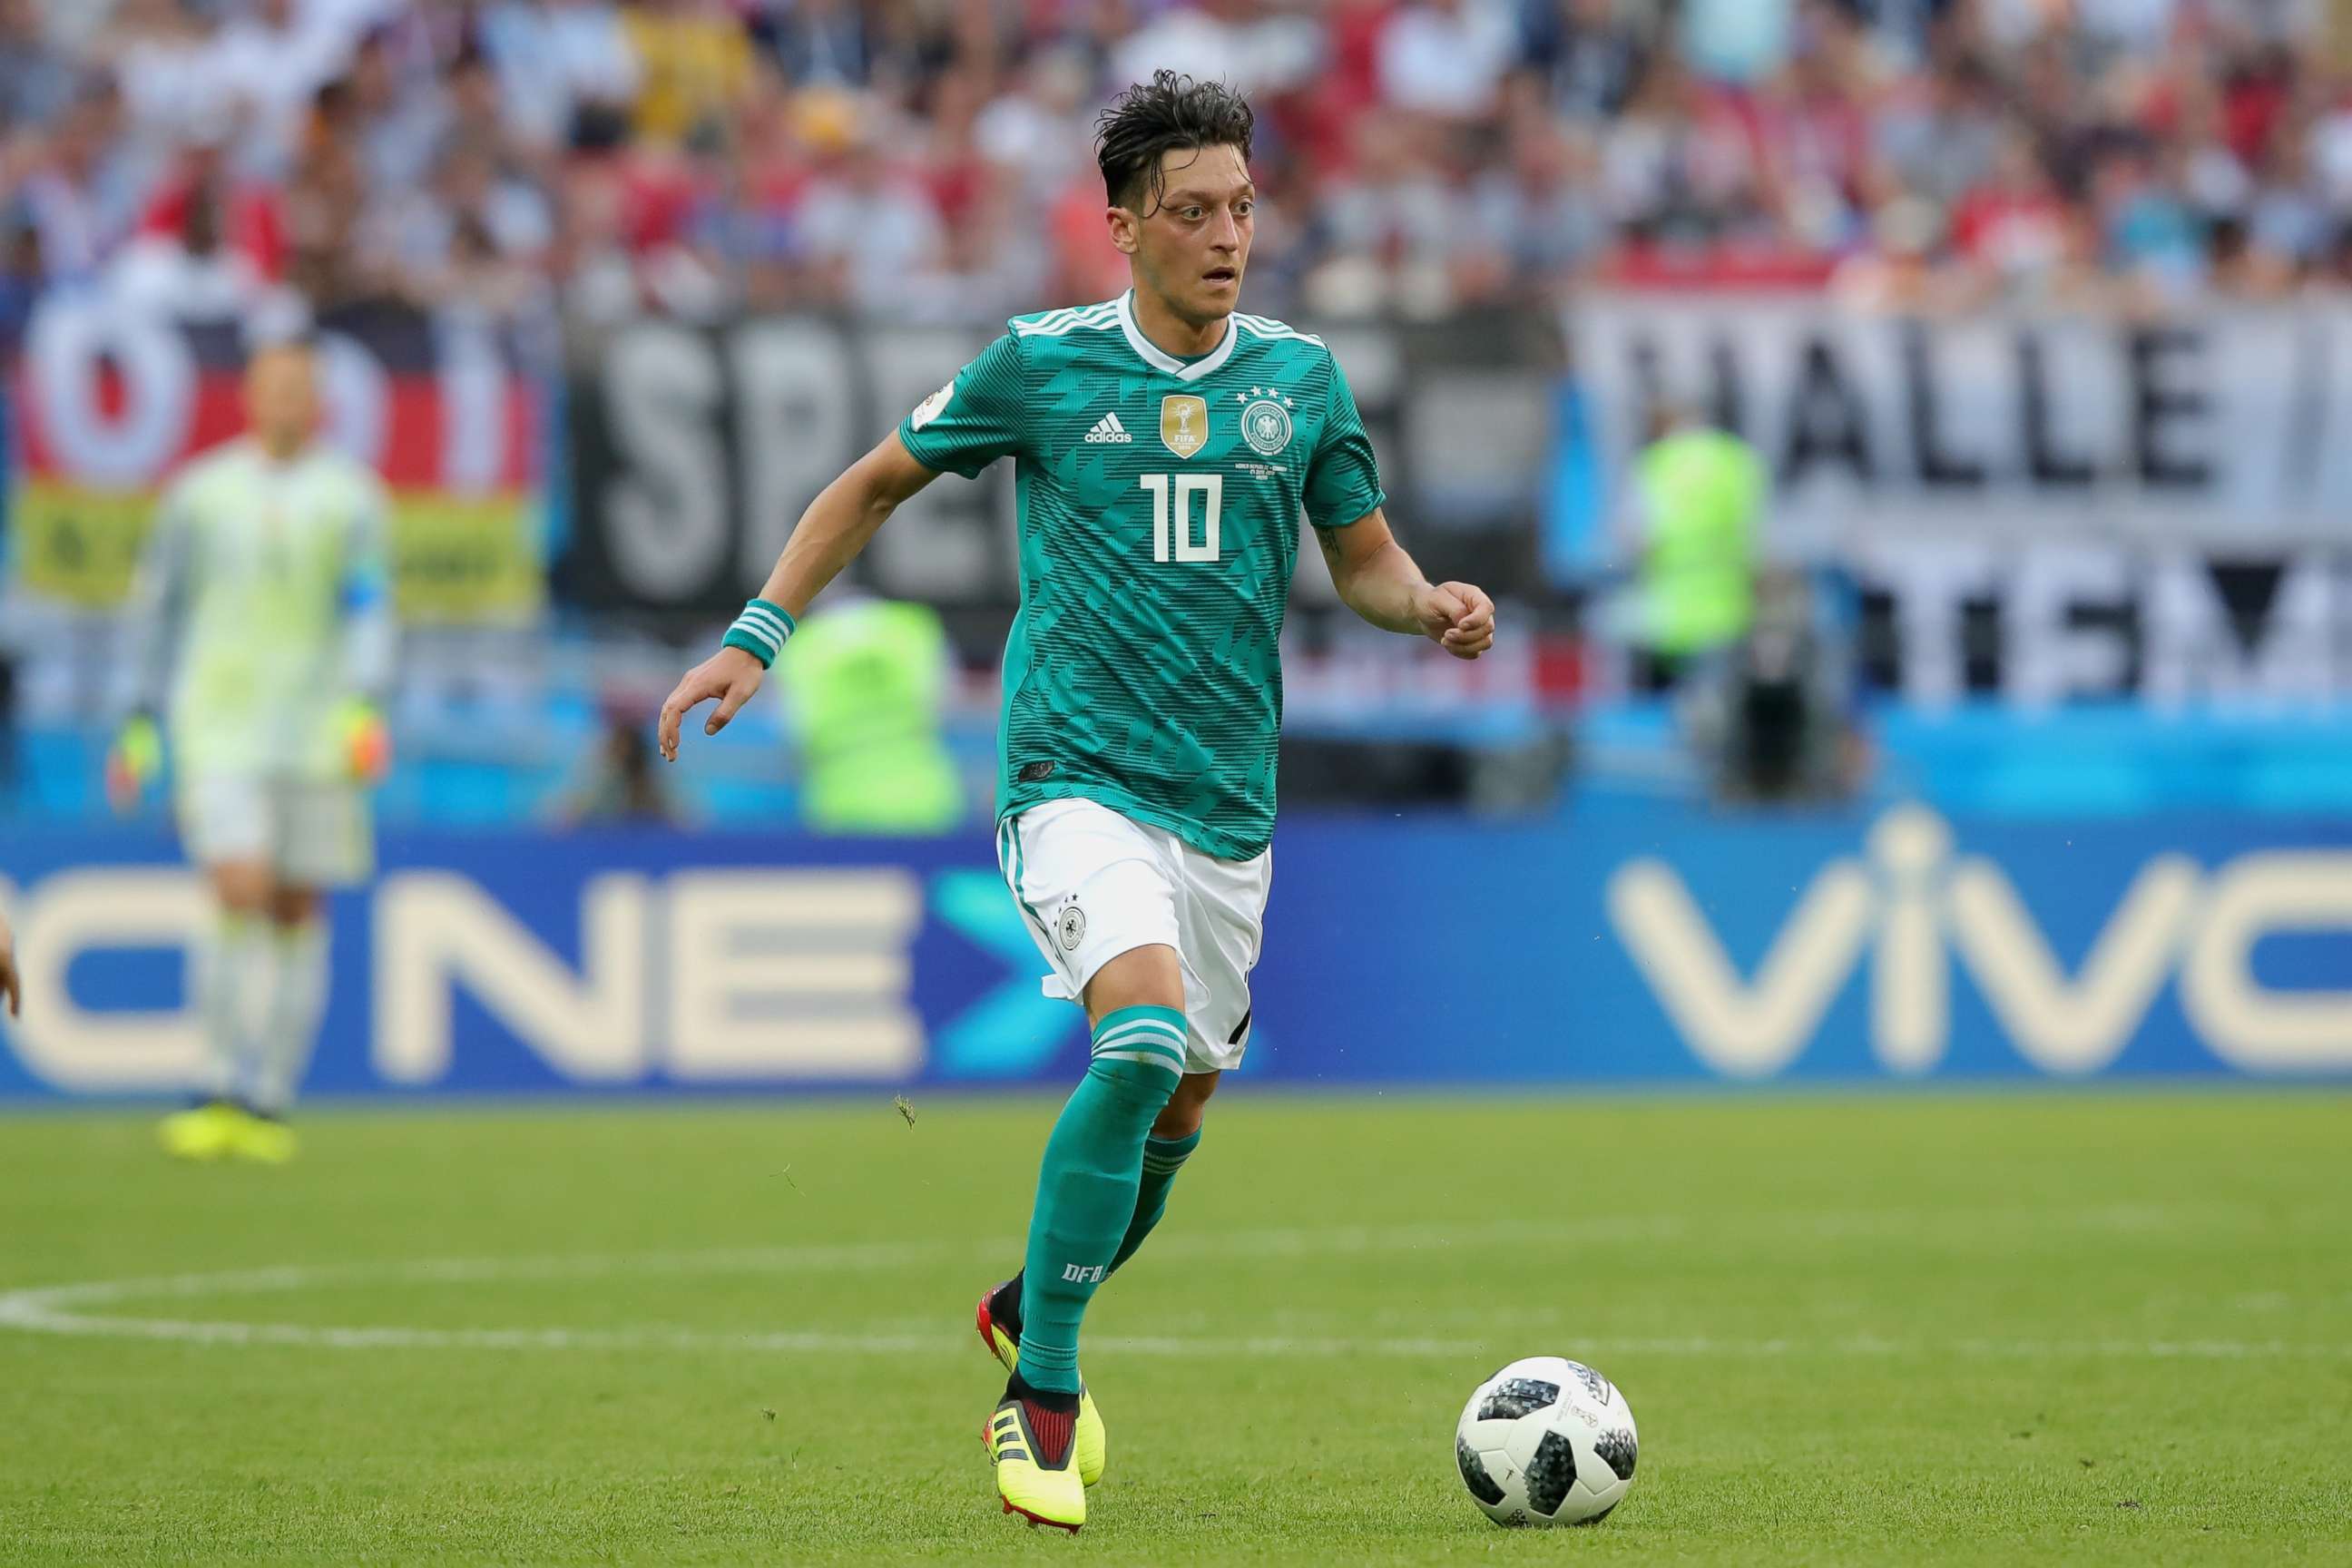 PHOTO: Mesut Oezil of Germany runs with the ball during the 2018 FIFA World Cup Russia group F match between Korea Republic and Germany at Kazan Arena, June 27, 2018, in Kazan, Russia.